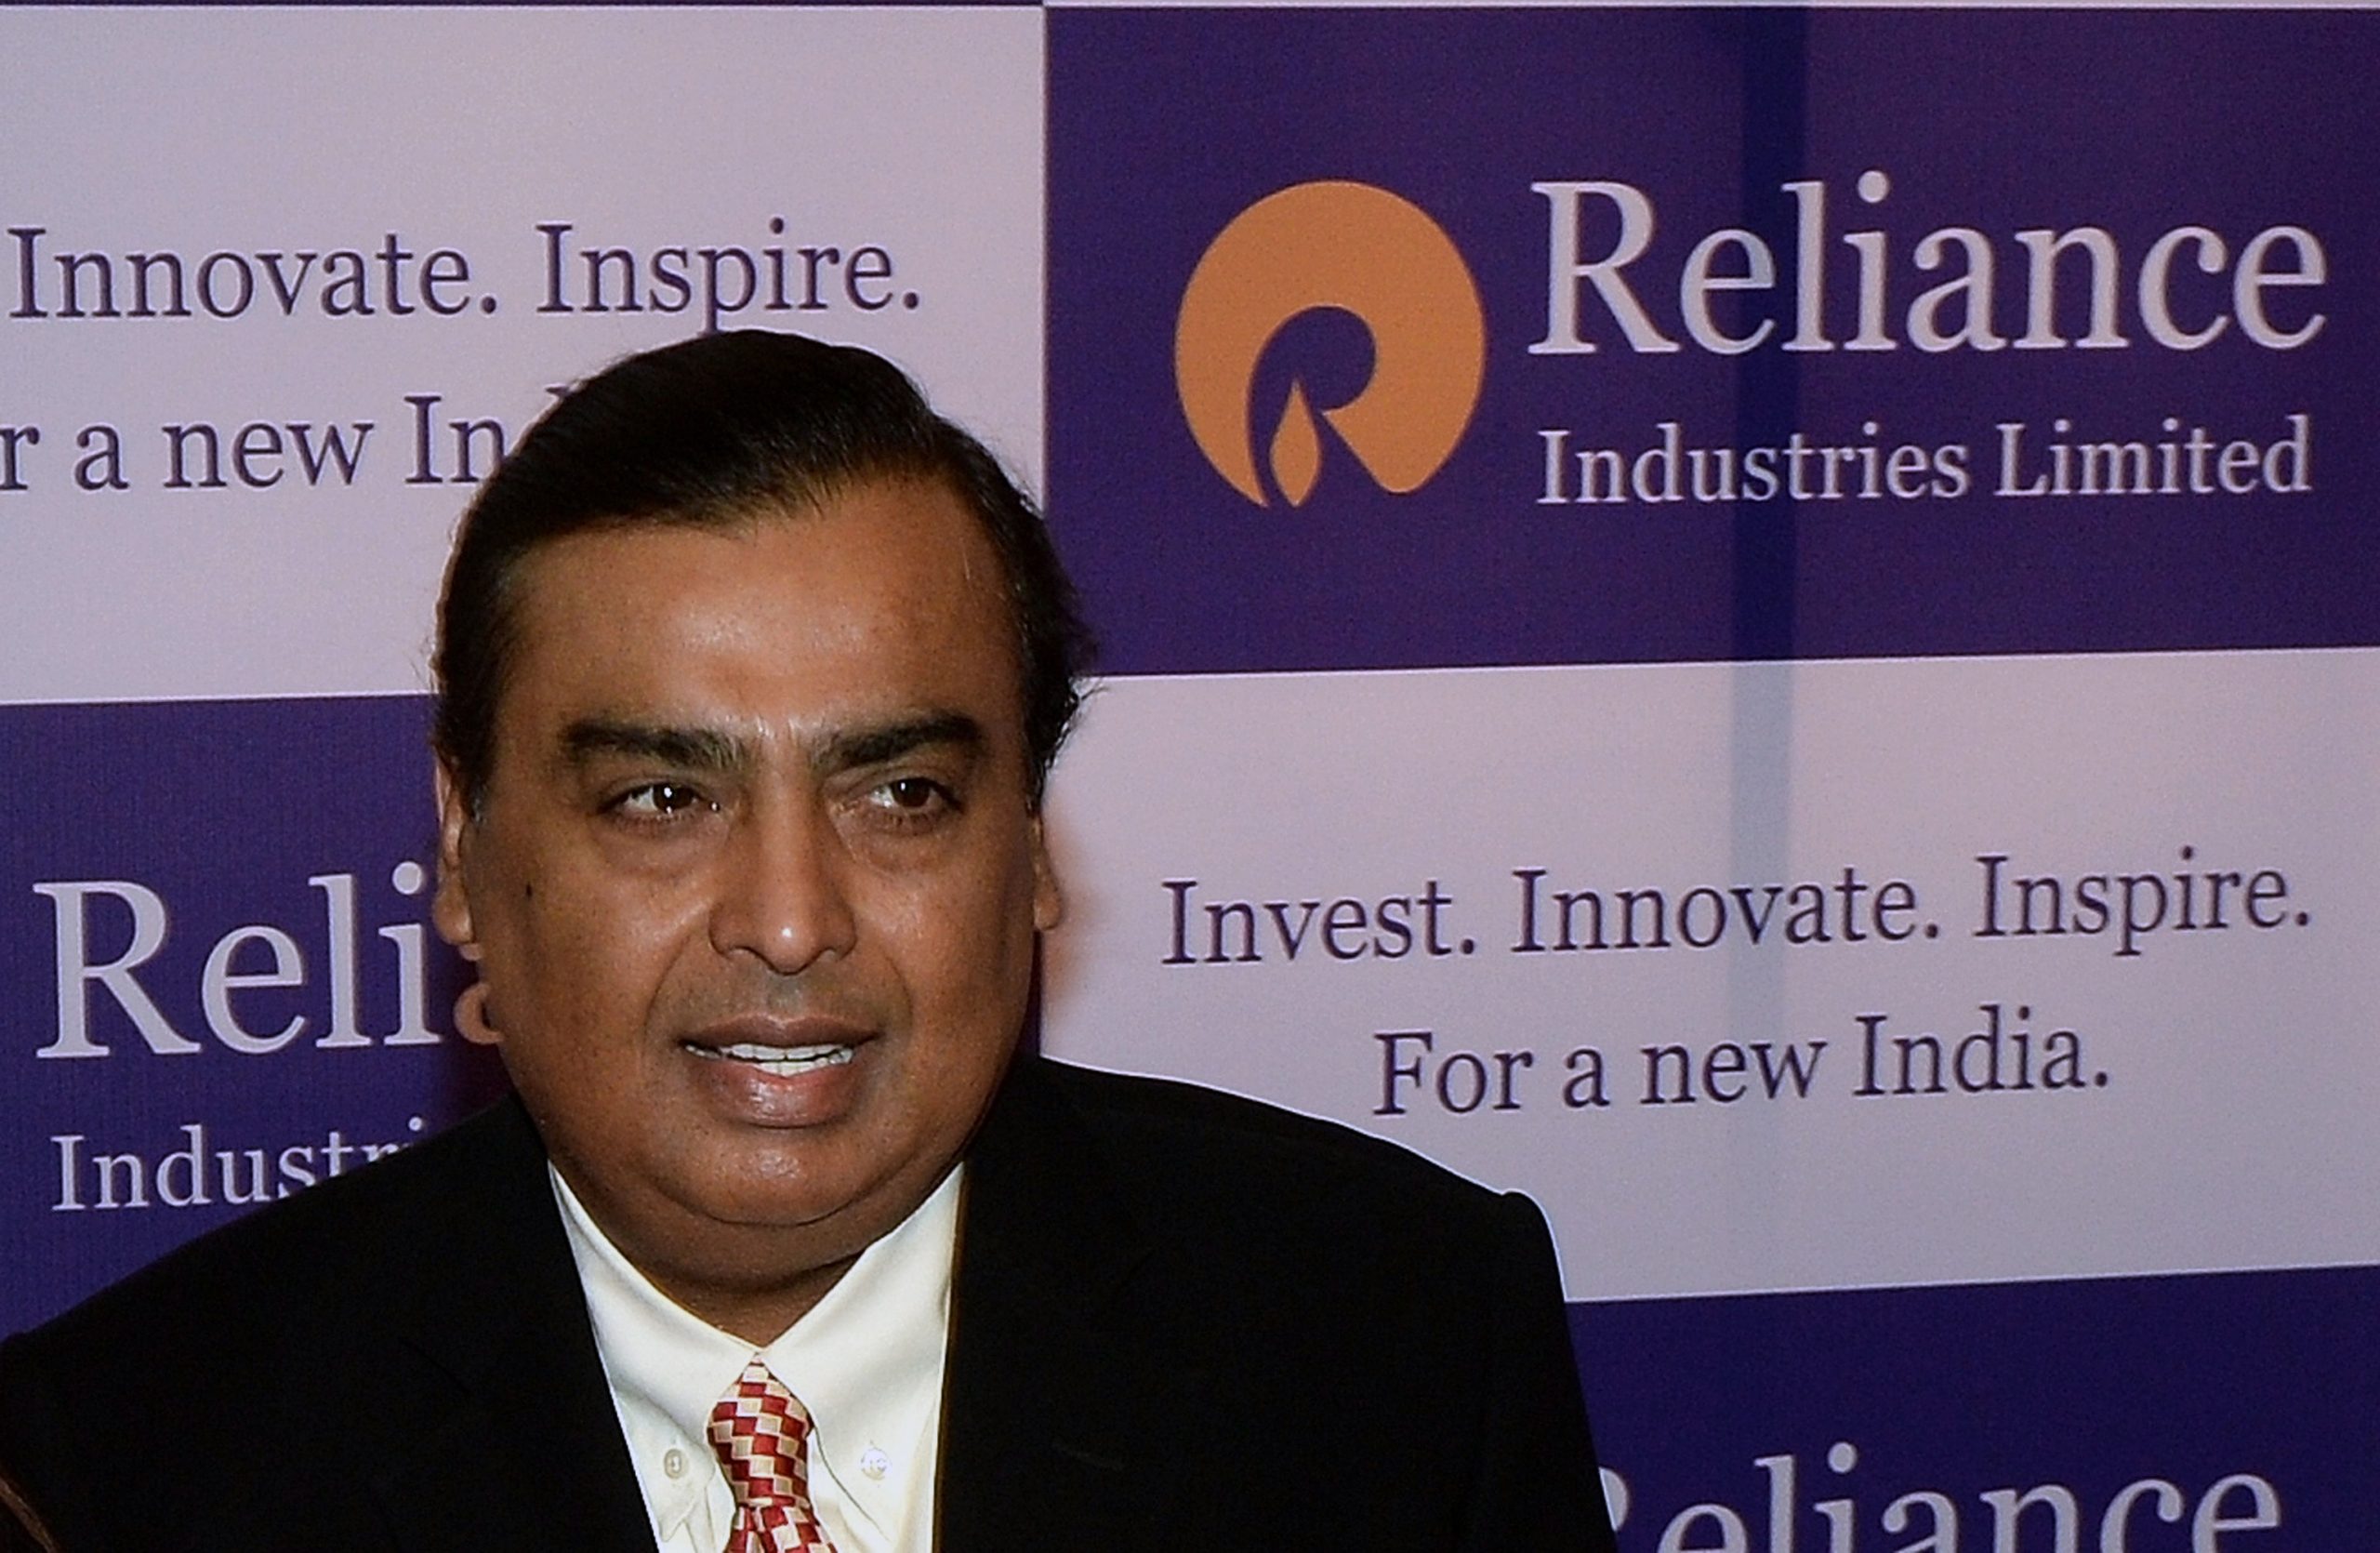 Reliance’s 43rd Annual General Meeting to be held virtually today: All you need to know